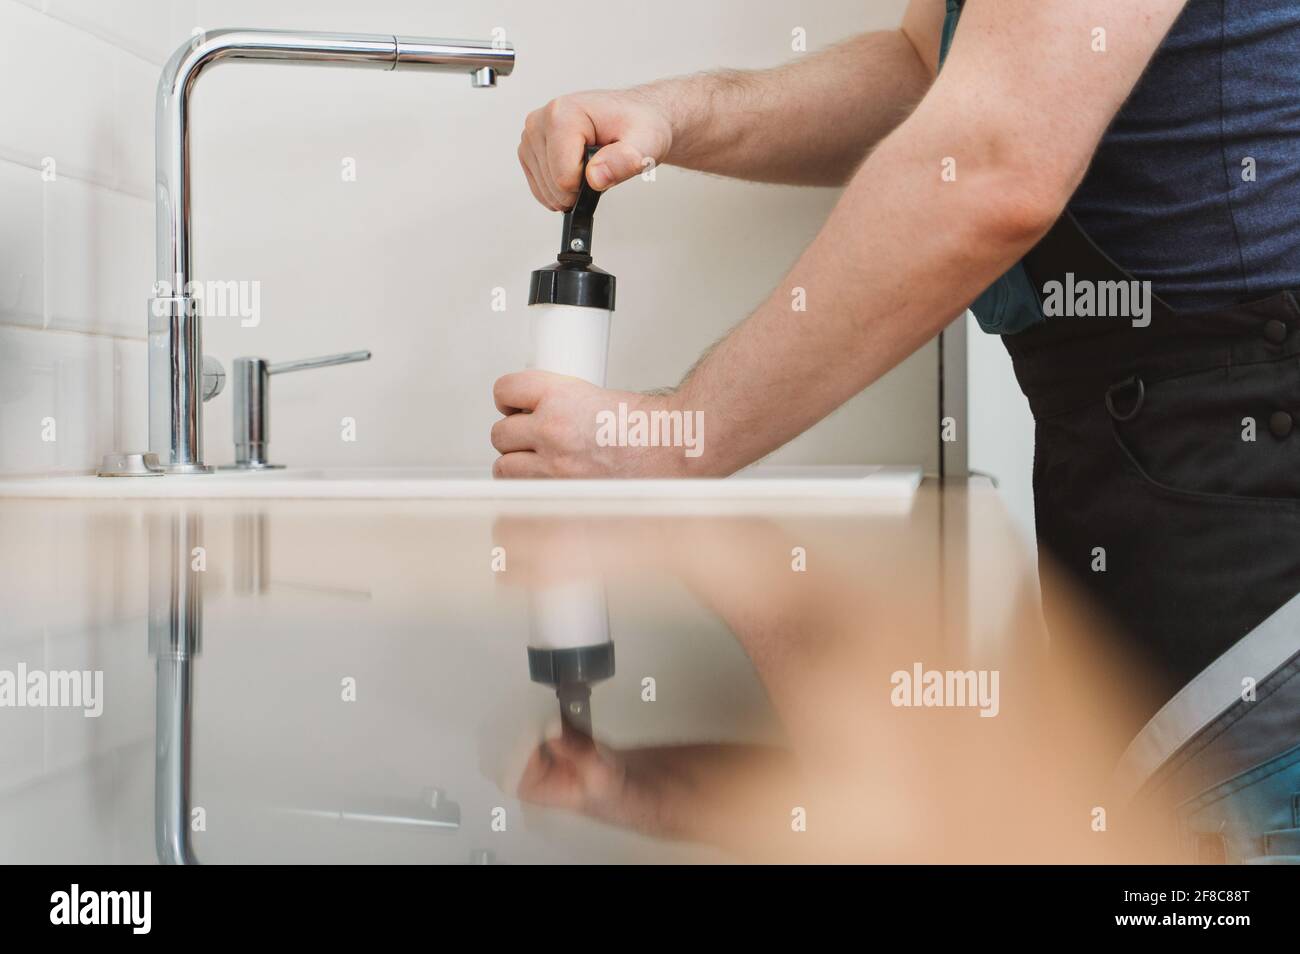 https://c8.alamy.com/comp/2F8C88T/plumber-unclogging-kitchen-sink-with-professional-force-pump-cleaner-2F8C88T.jpg